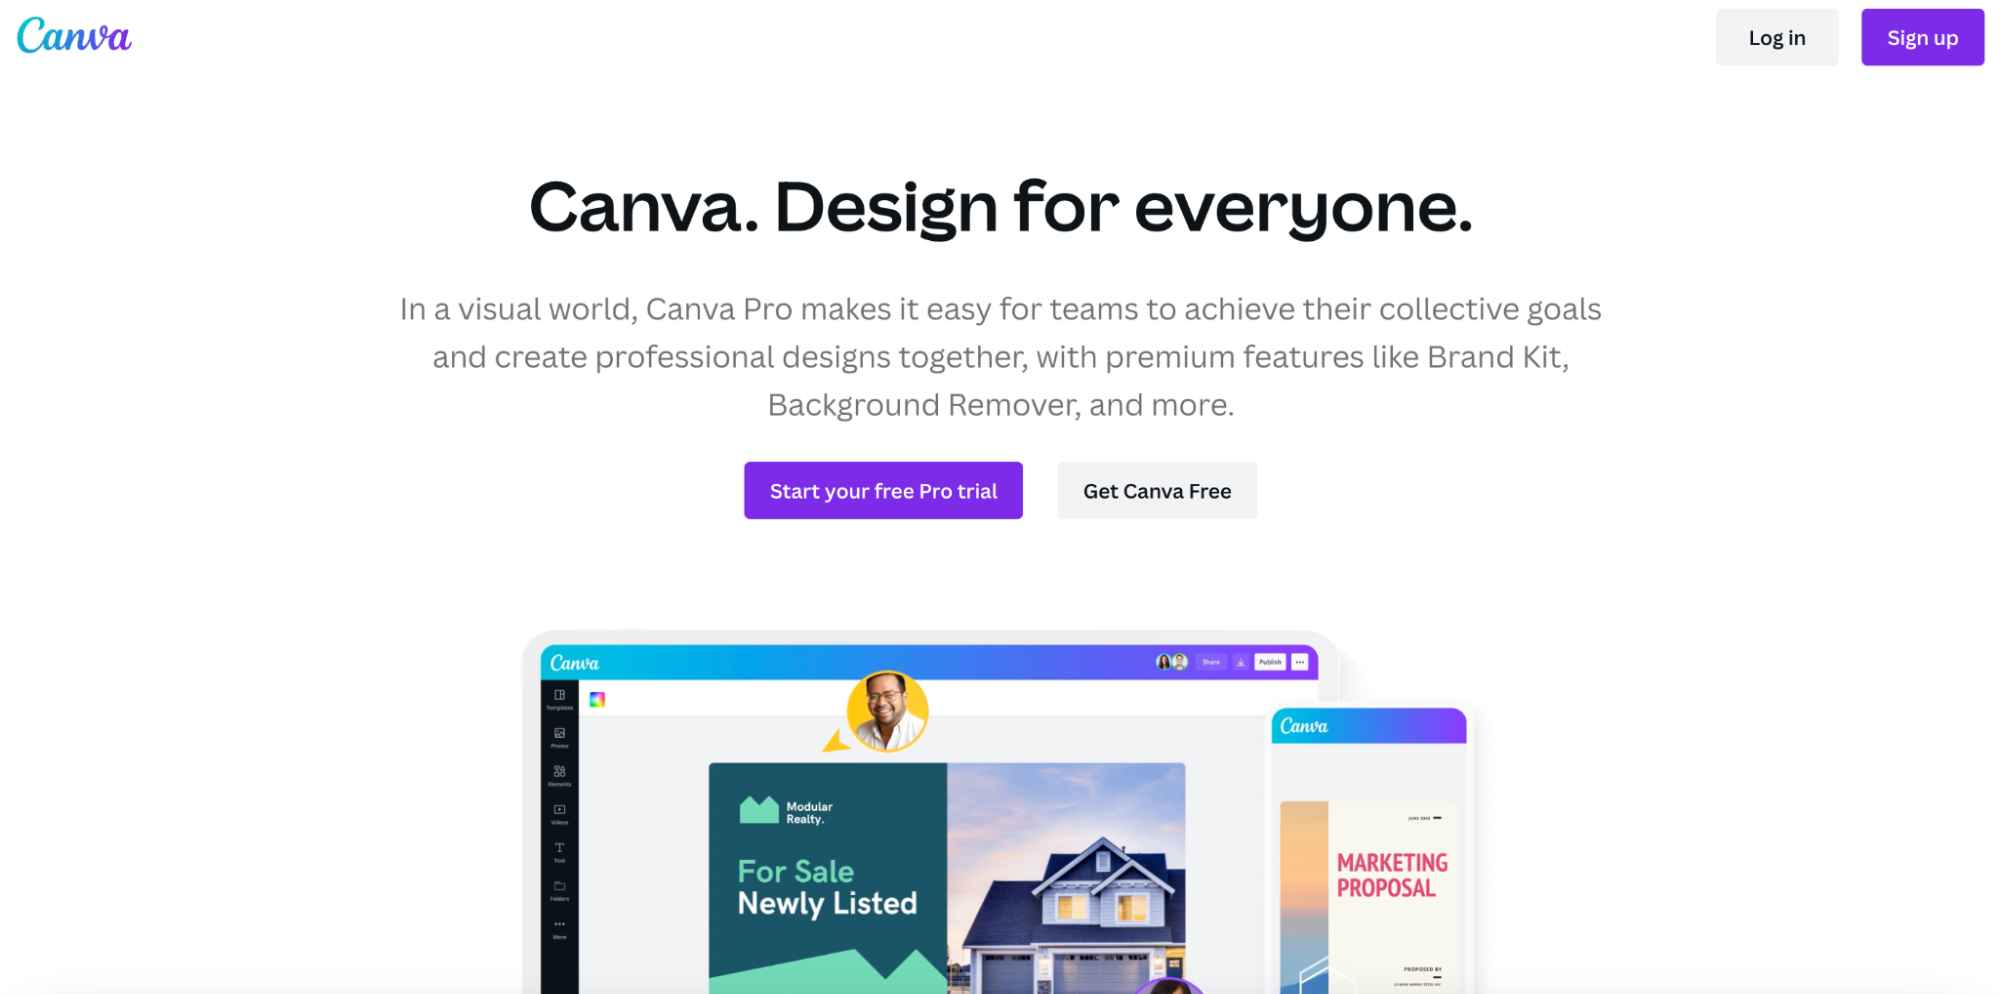 The homepage for Canva